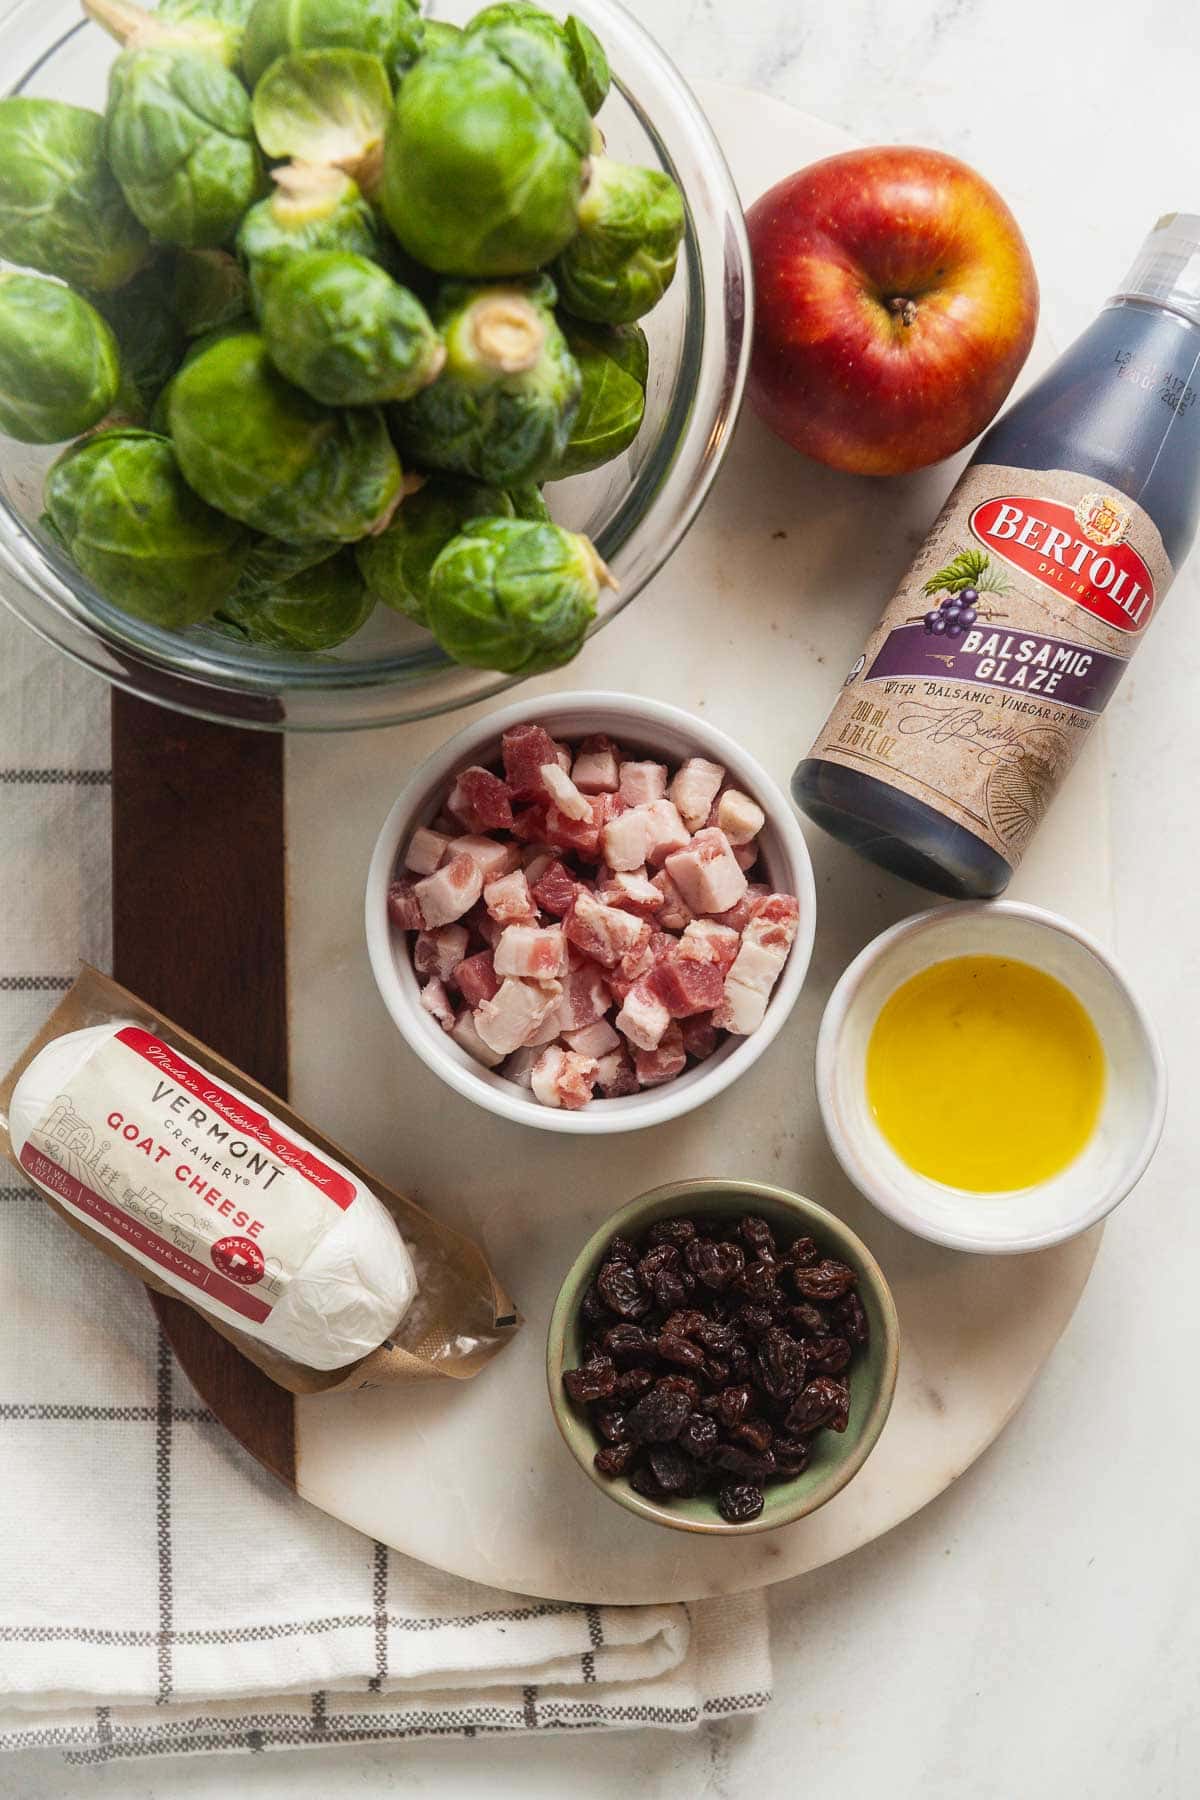 Ingredients for Brussels Spouts Salad.